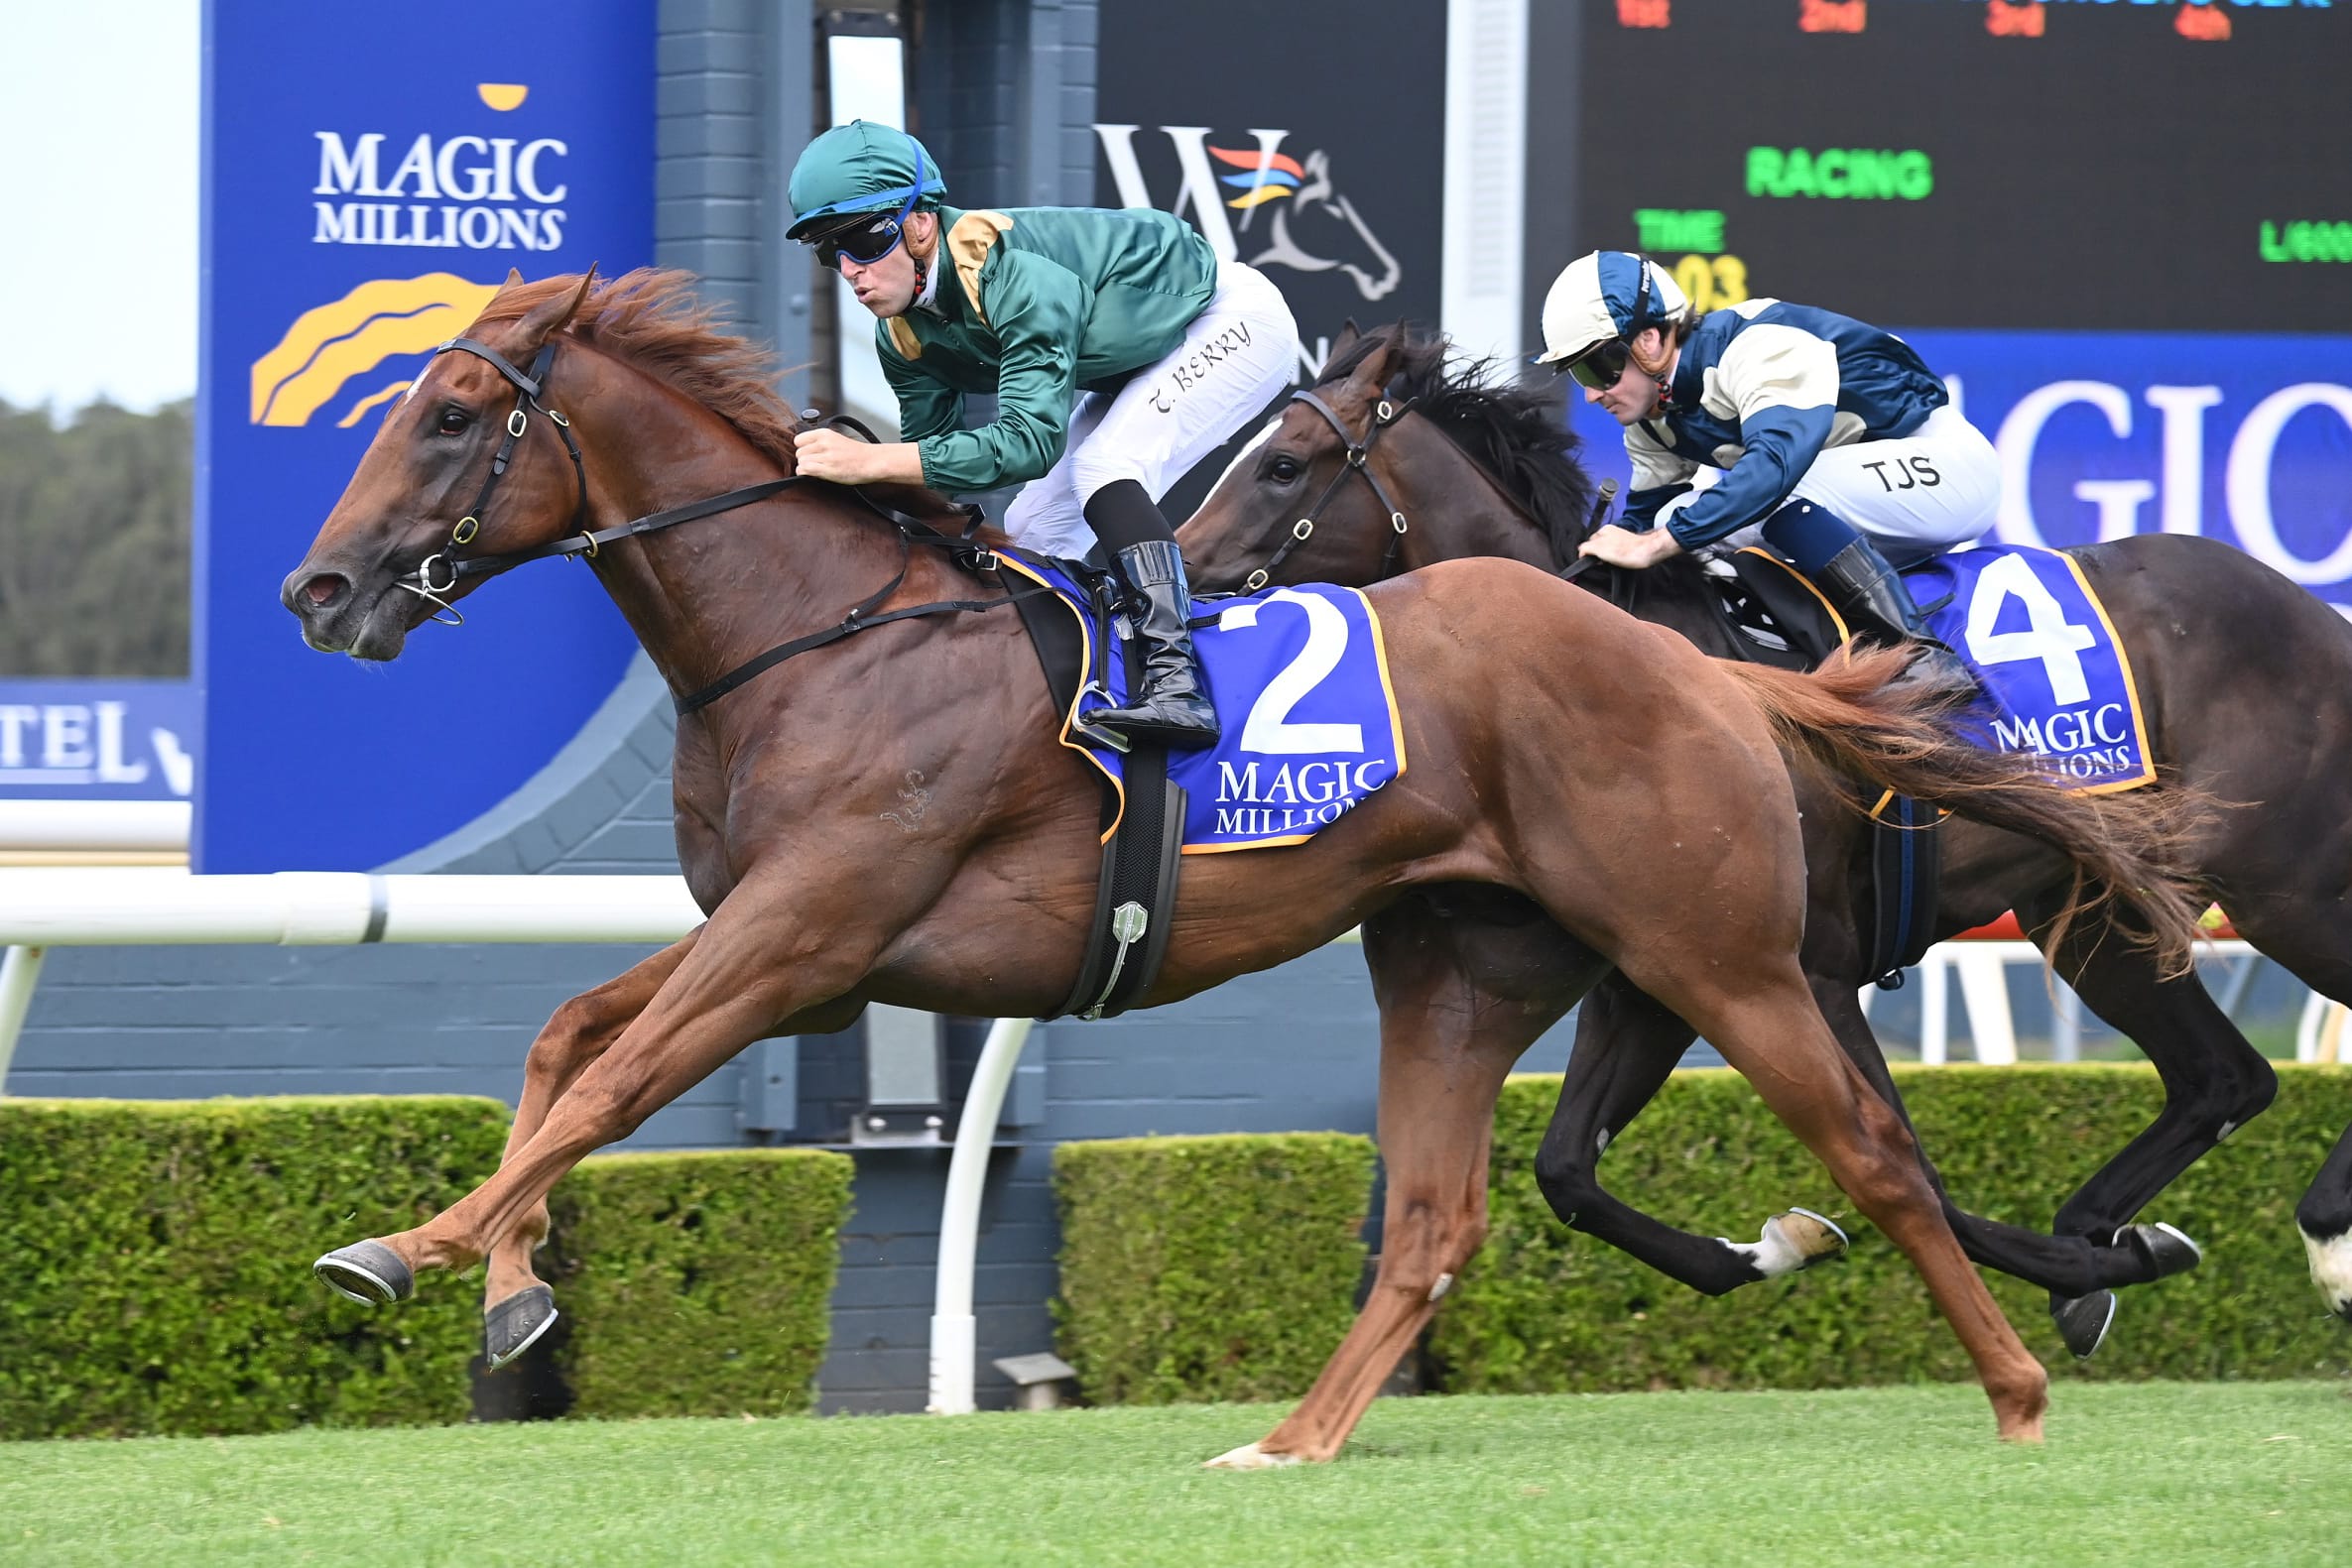 Highness Storms Home in Wyong Millions Thriller